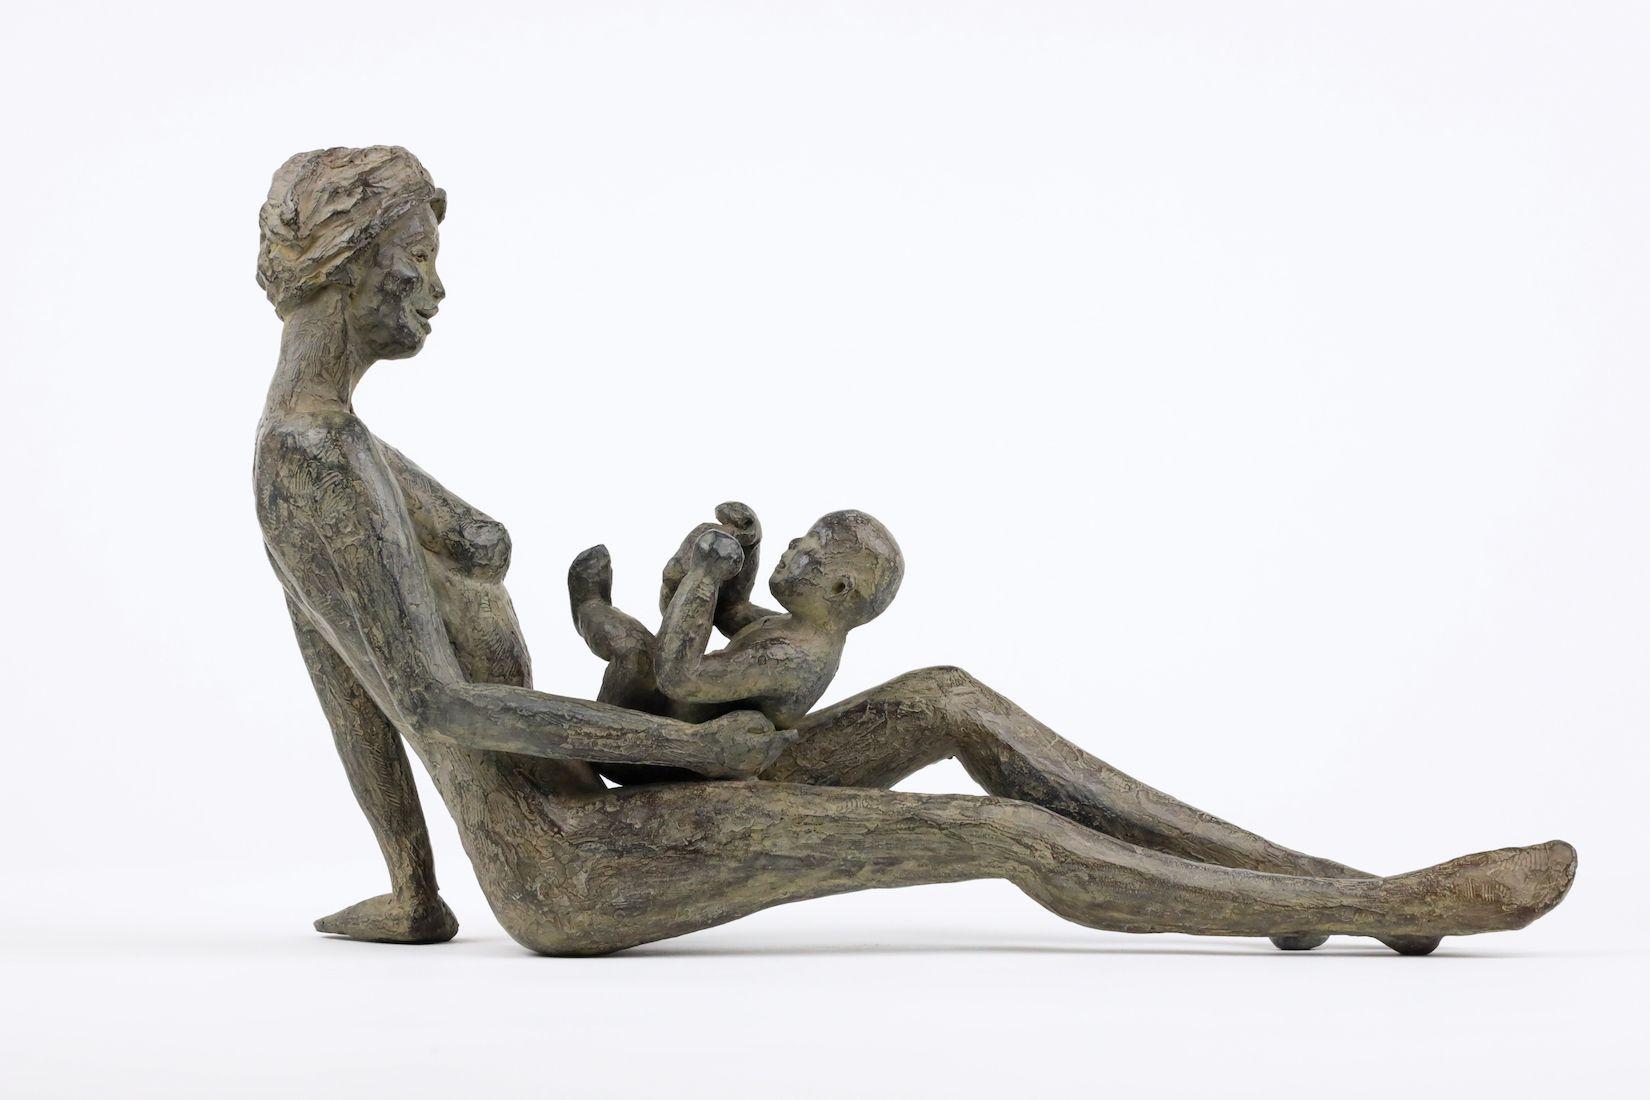 Babbling by Marine de Soos - bronze sculpture, mother and child